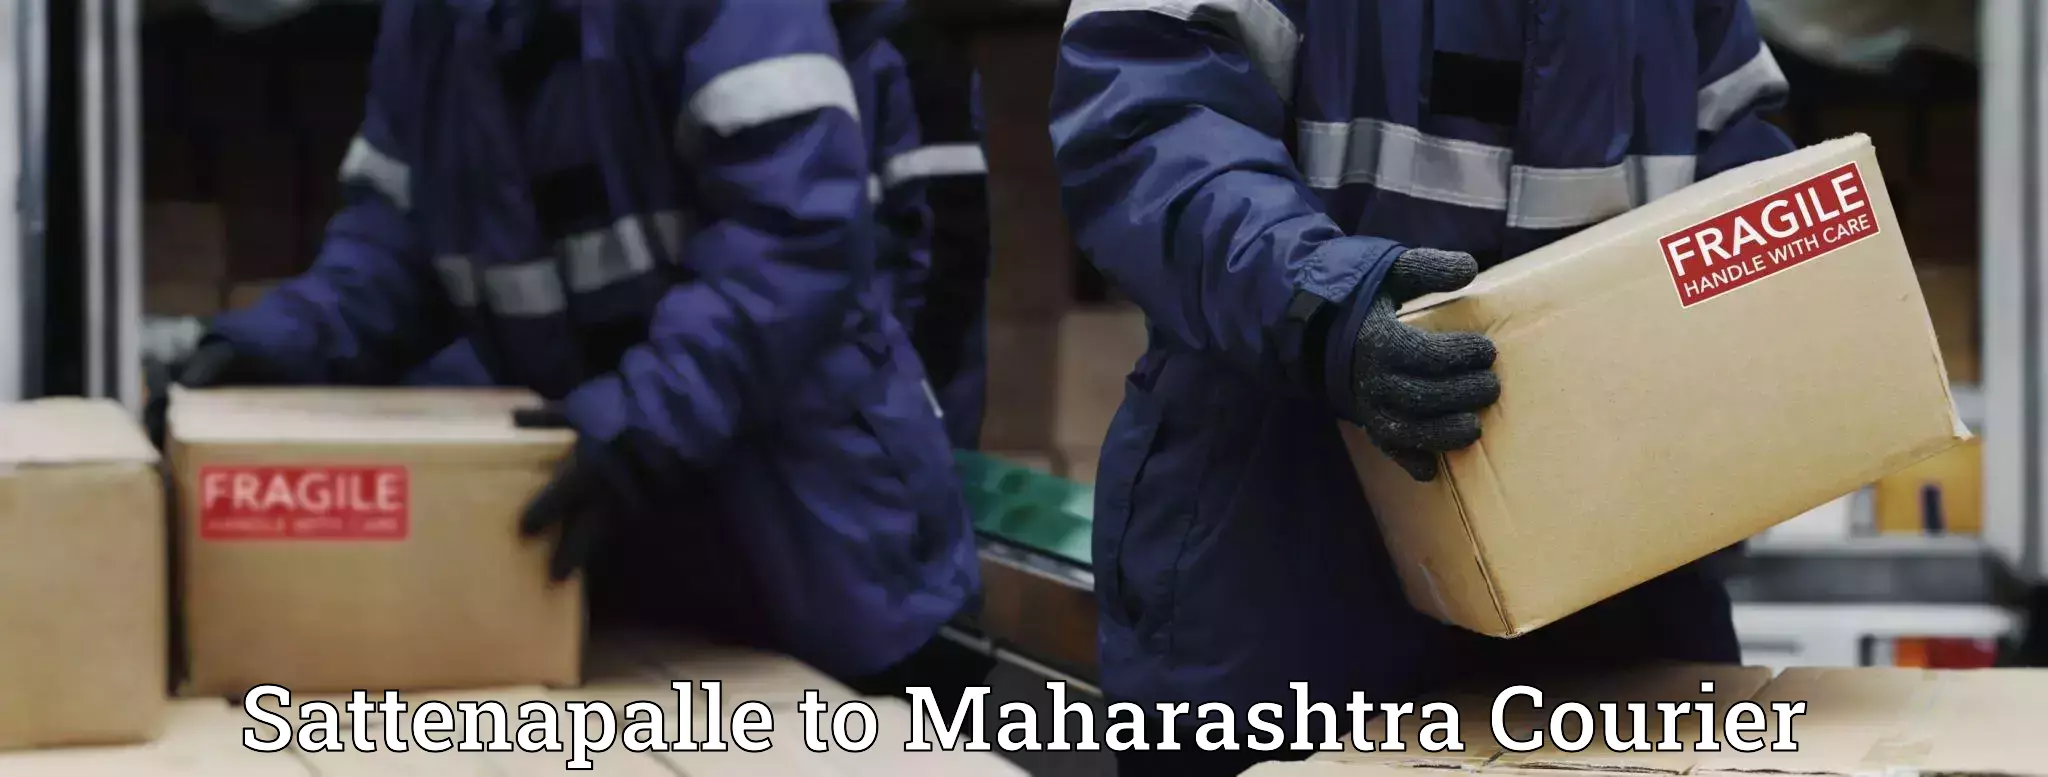 Subscription-based courier Sattenapalle to Maharashtra